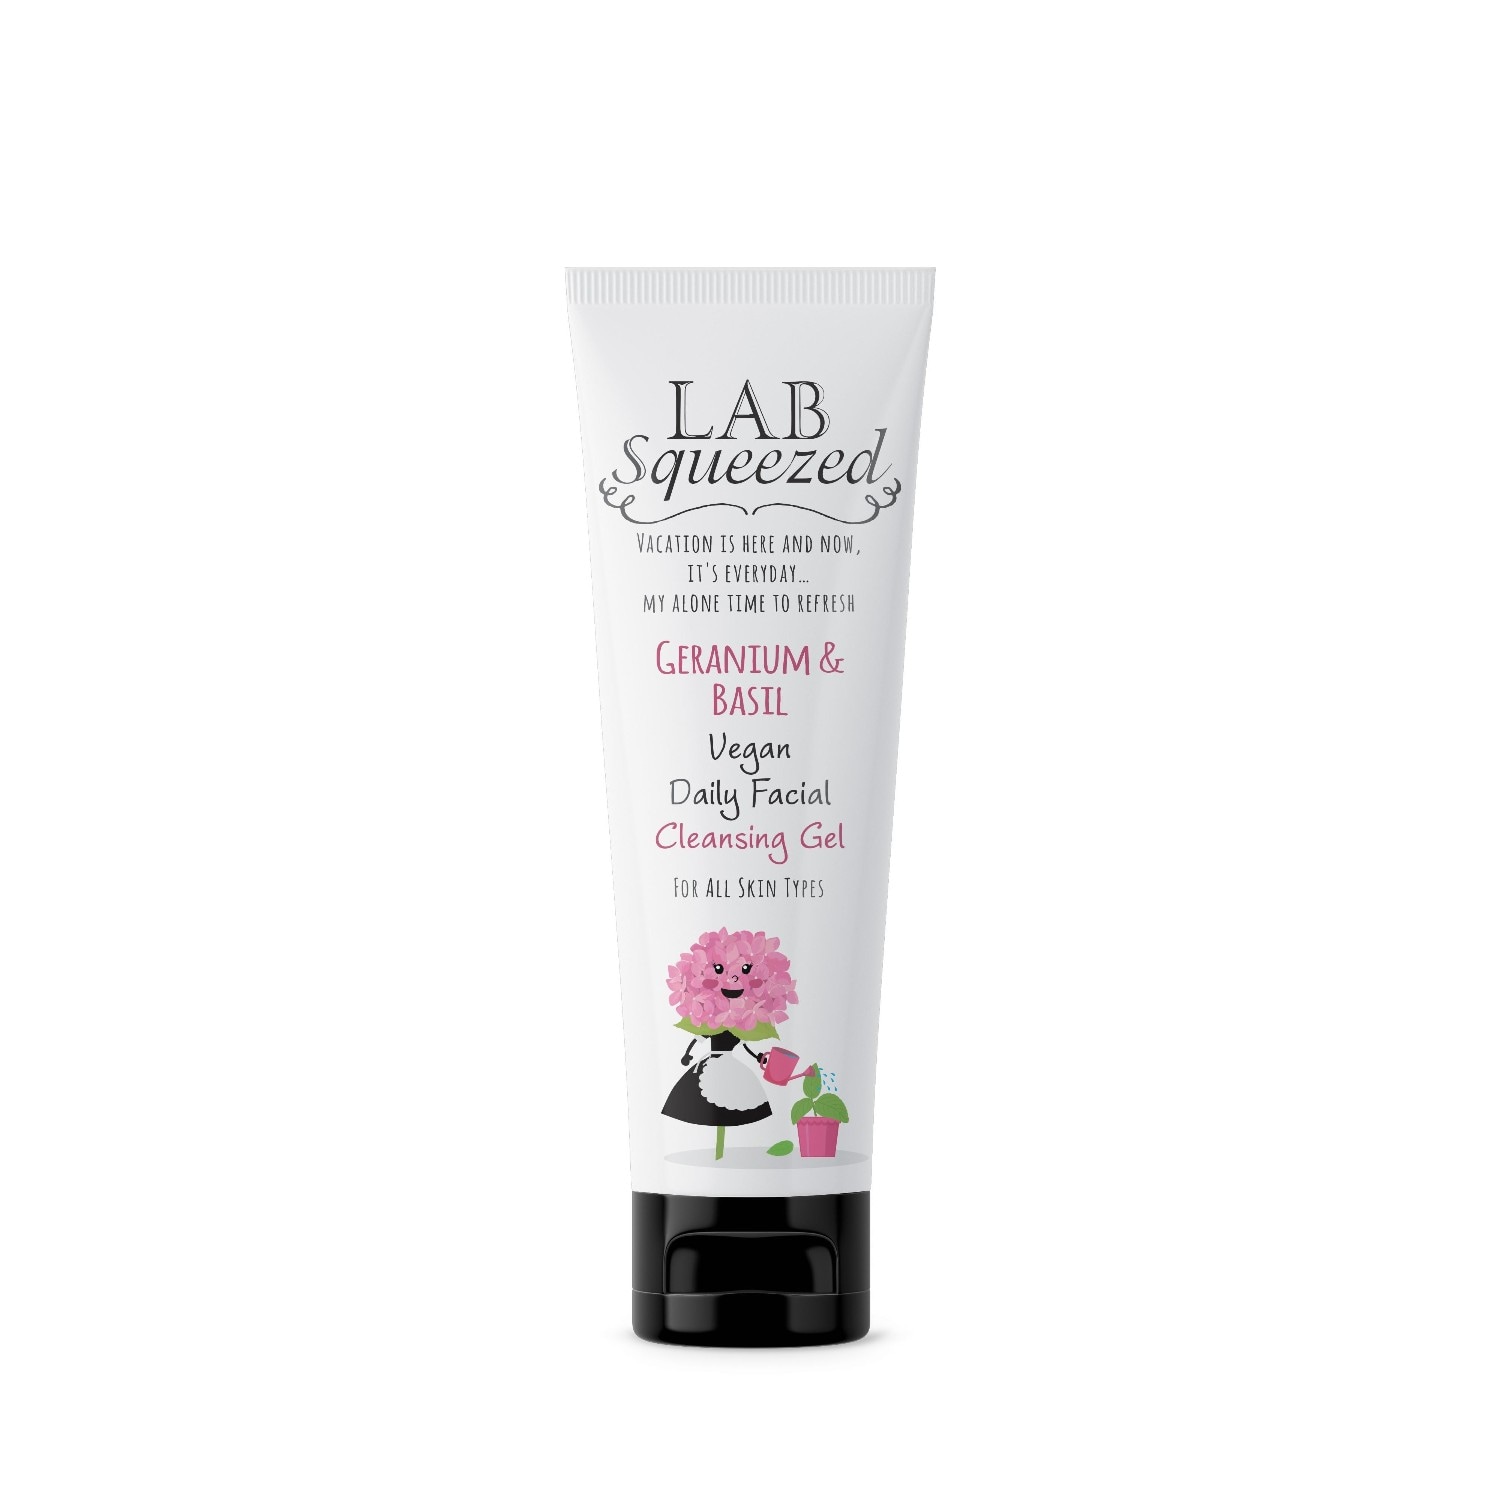 LAB SQUEEZED Vegan Daily Facial Cleansing Gel